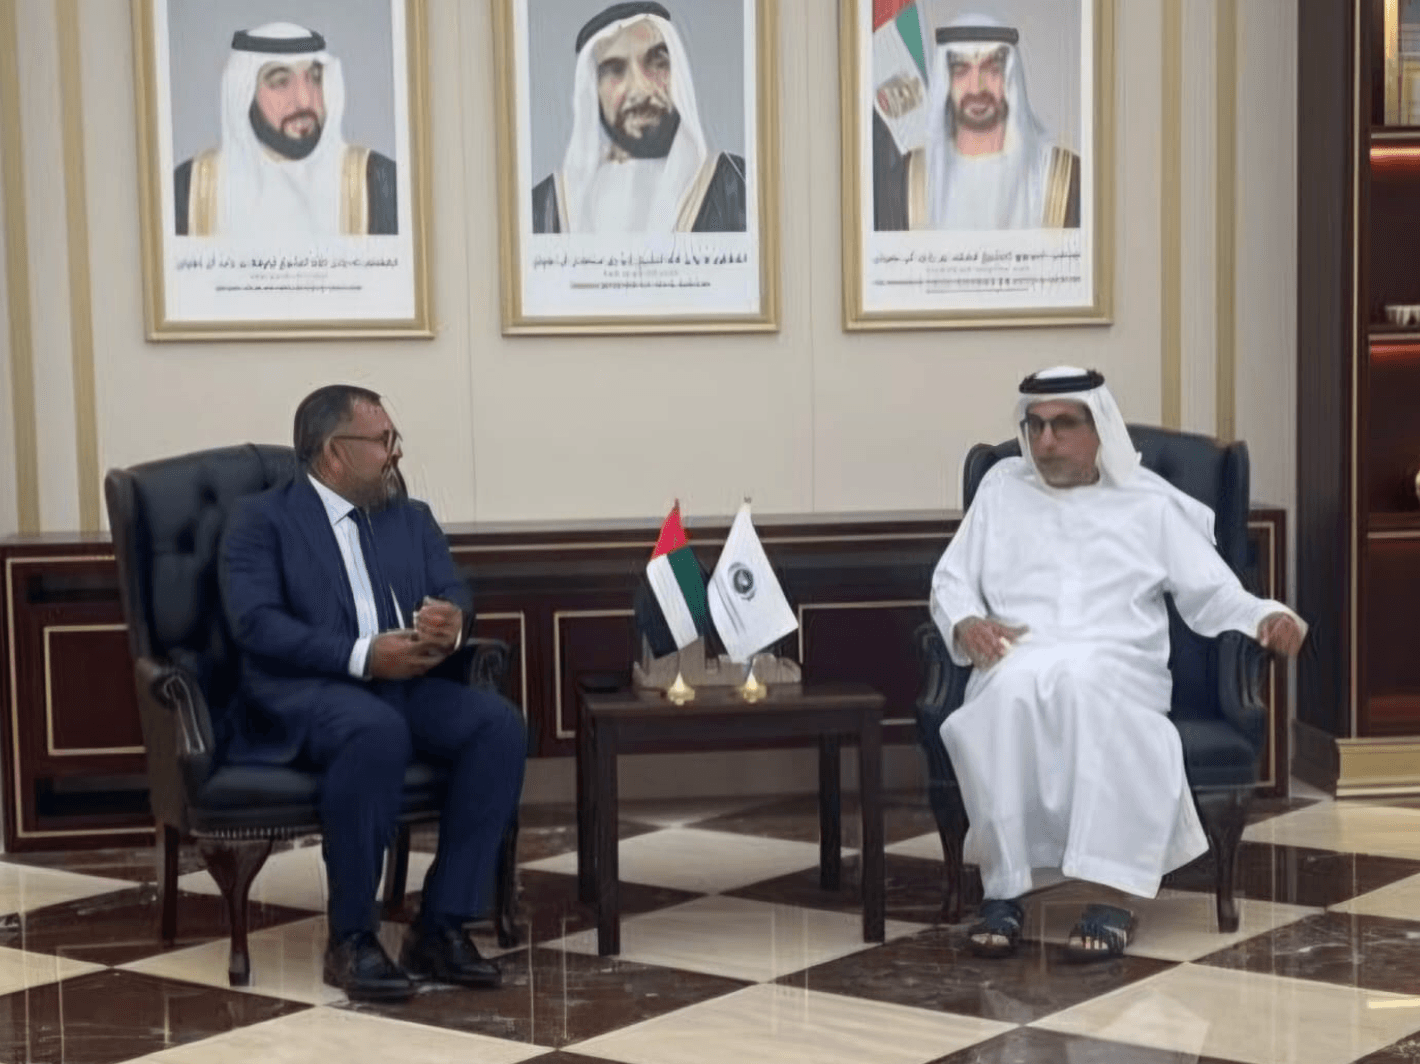 Minister Zameer meets with the Director General of the Abu Dhabi Fund for Development